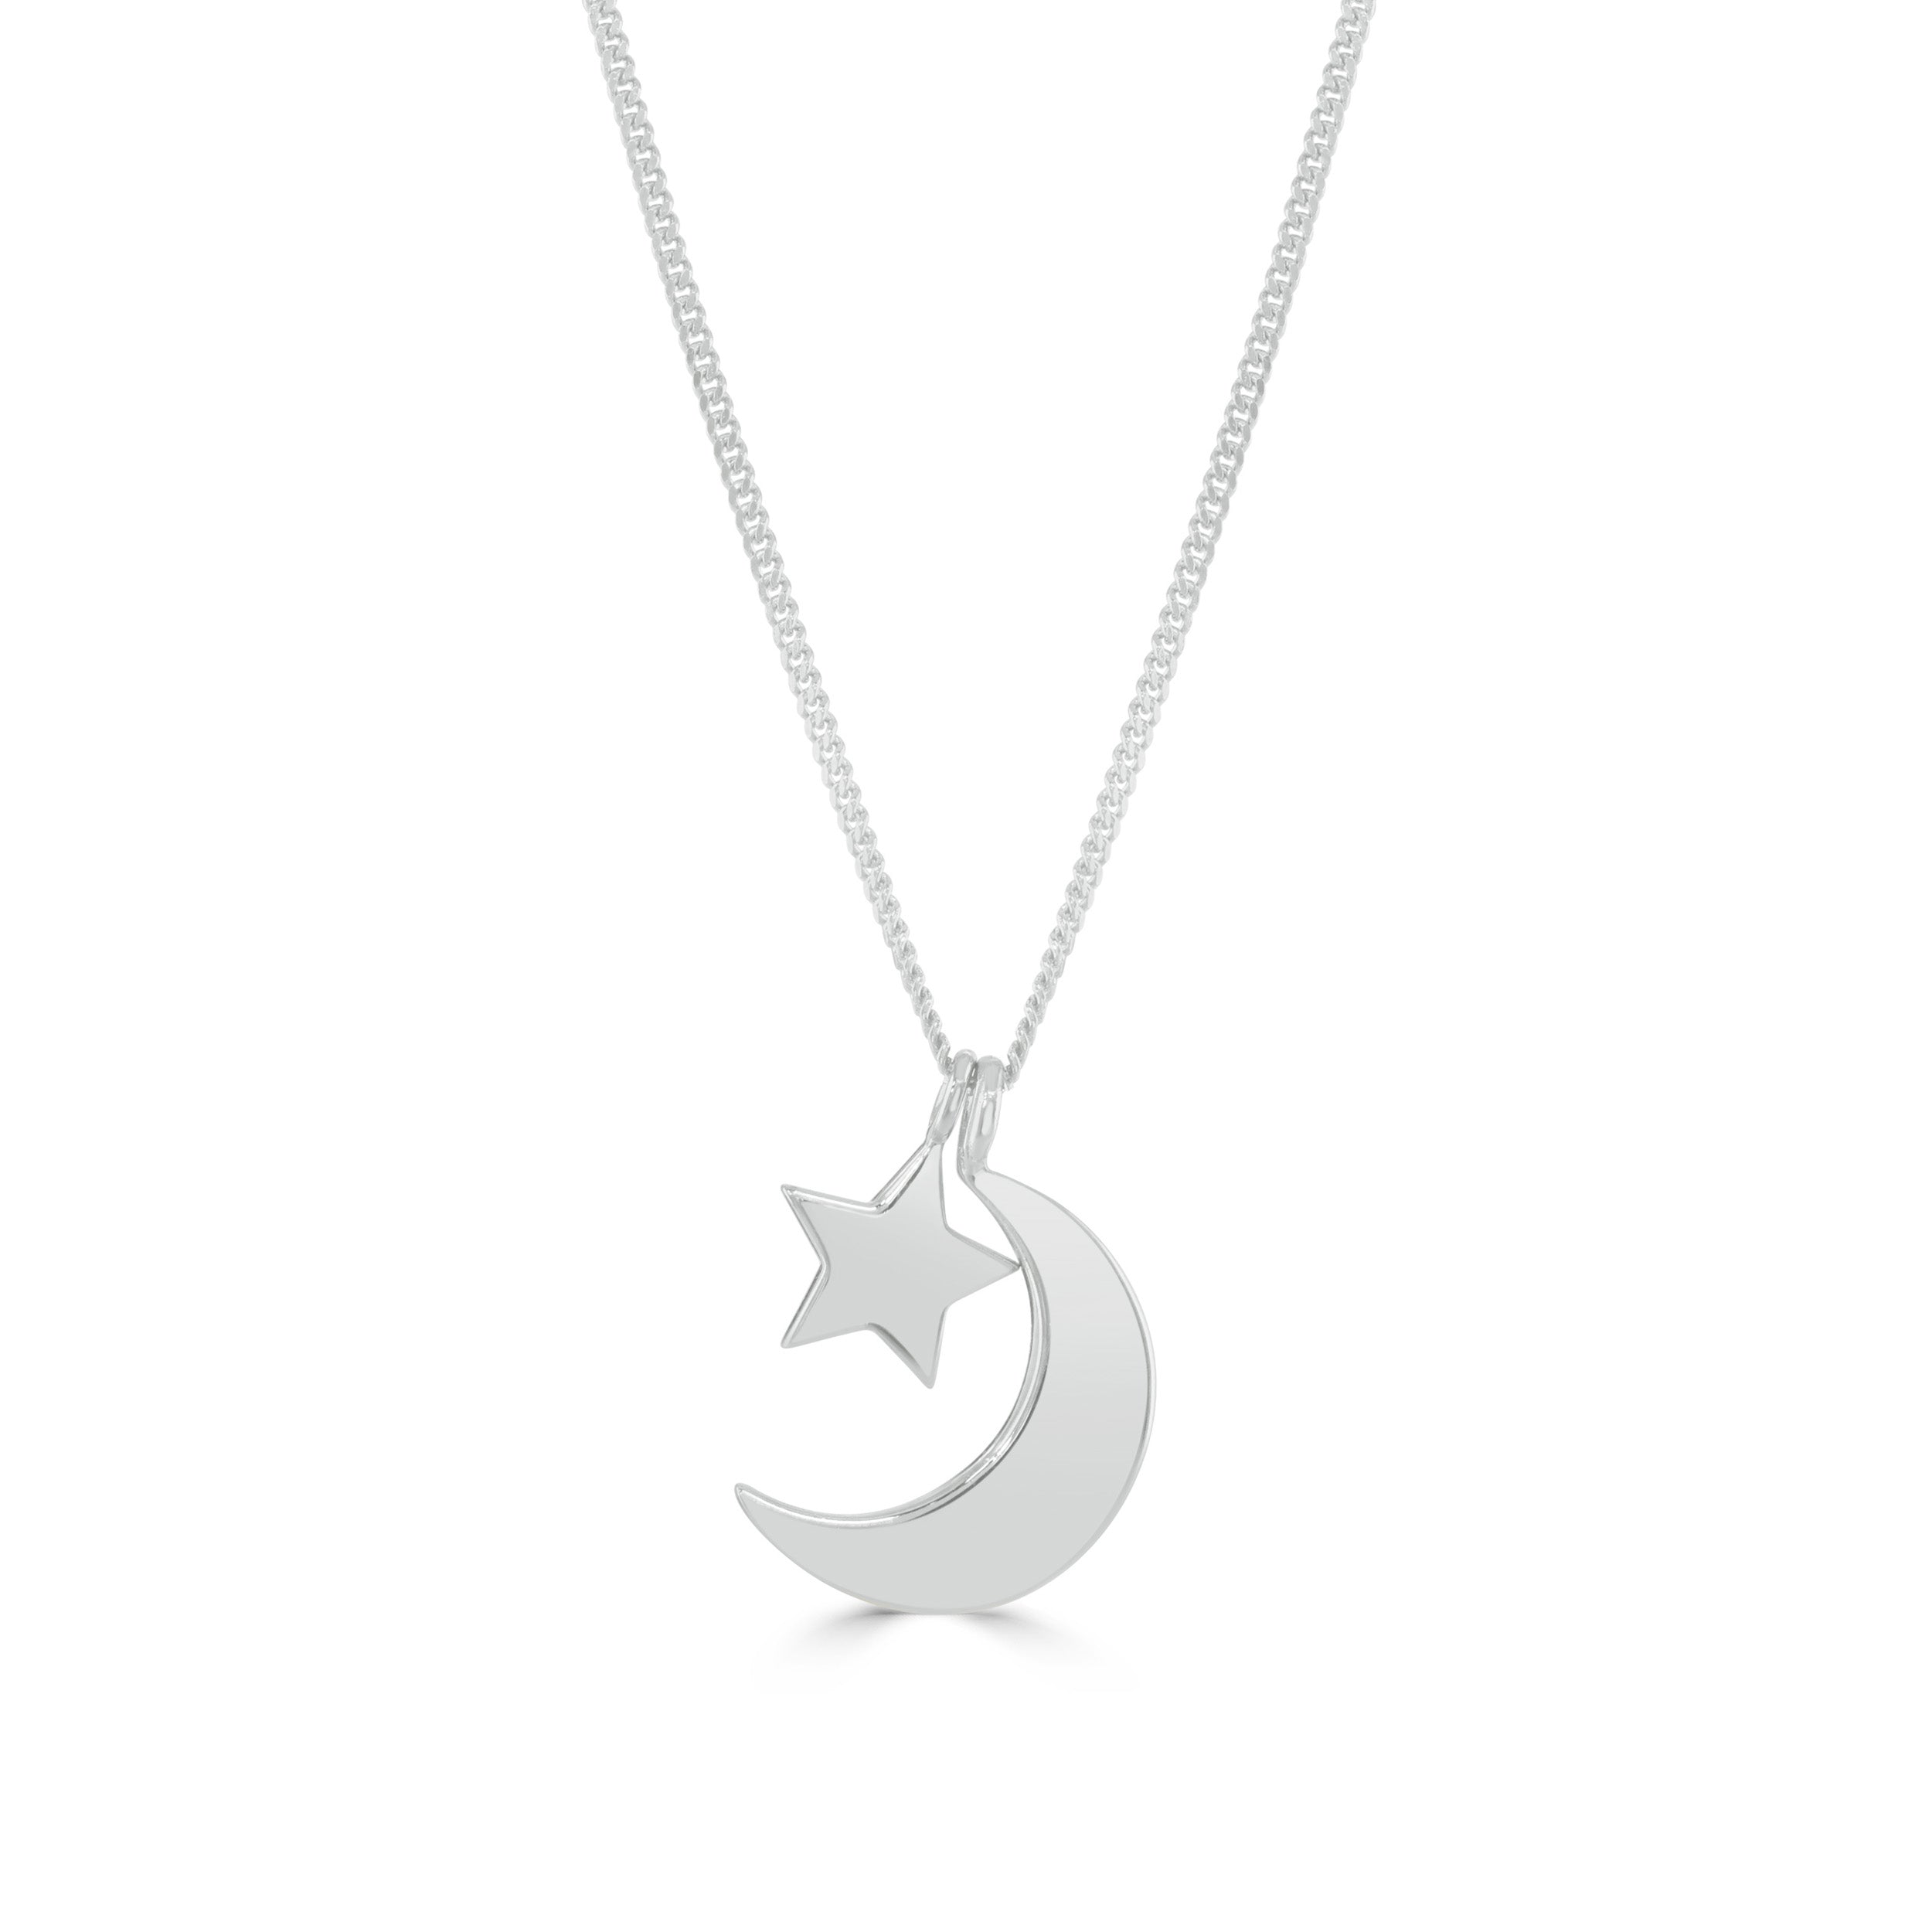 Silver Dainty Moon & Star Necklace